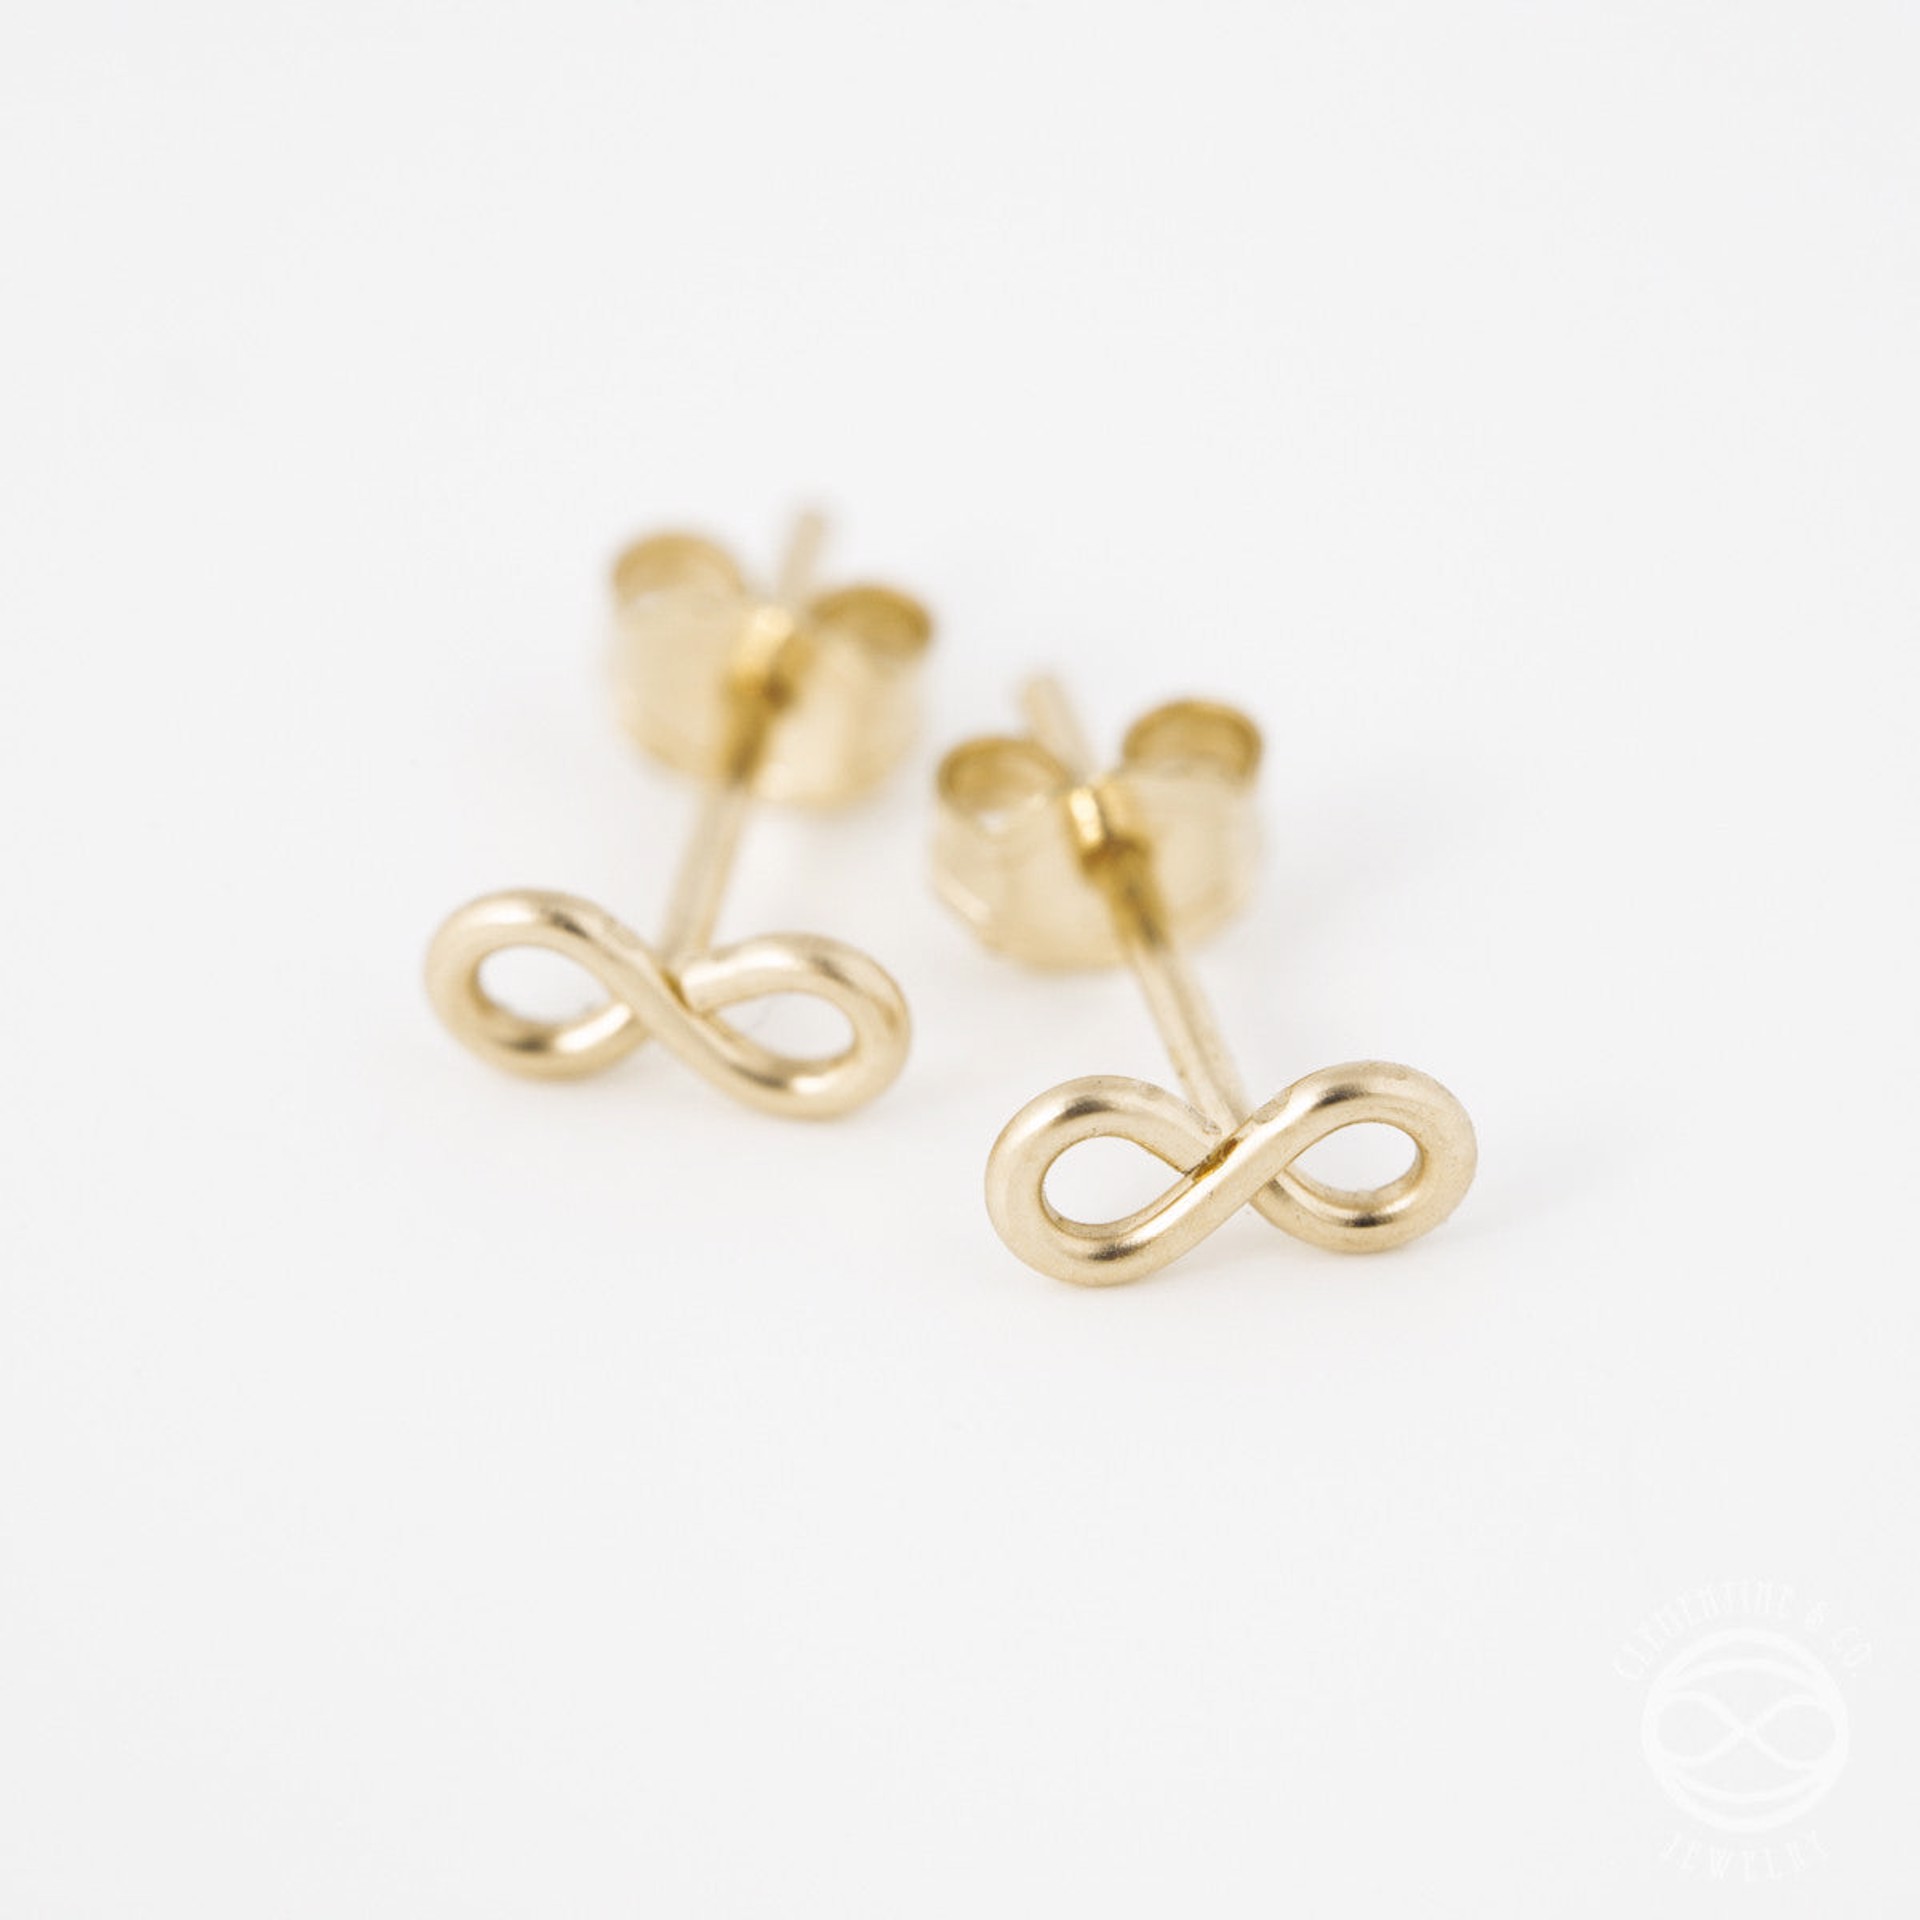 Shape Studs in Gold - Infinity by Clementine & Co. Jewelry